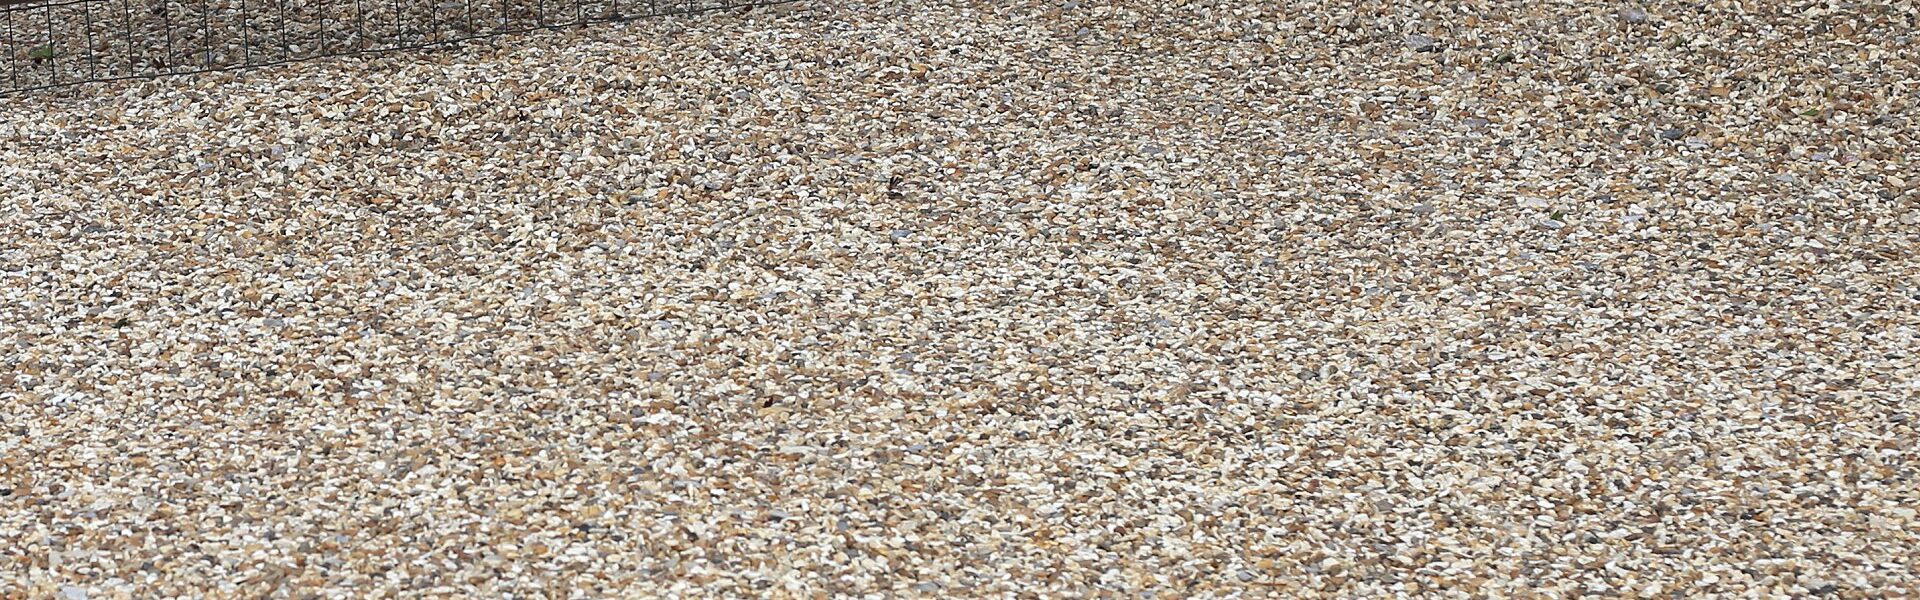 Shingle Gravel Driveway Staines